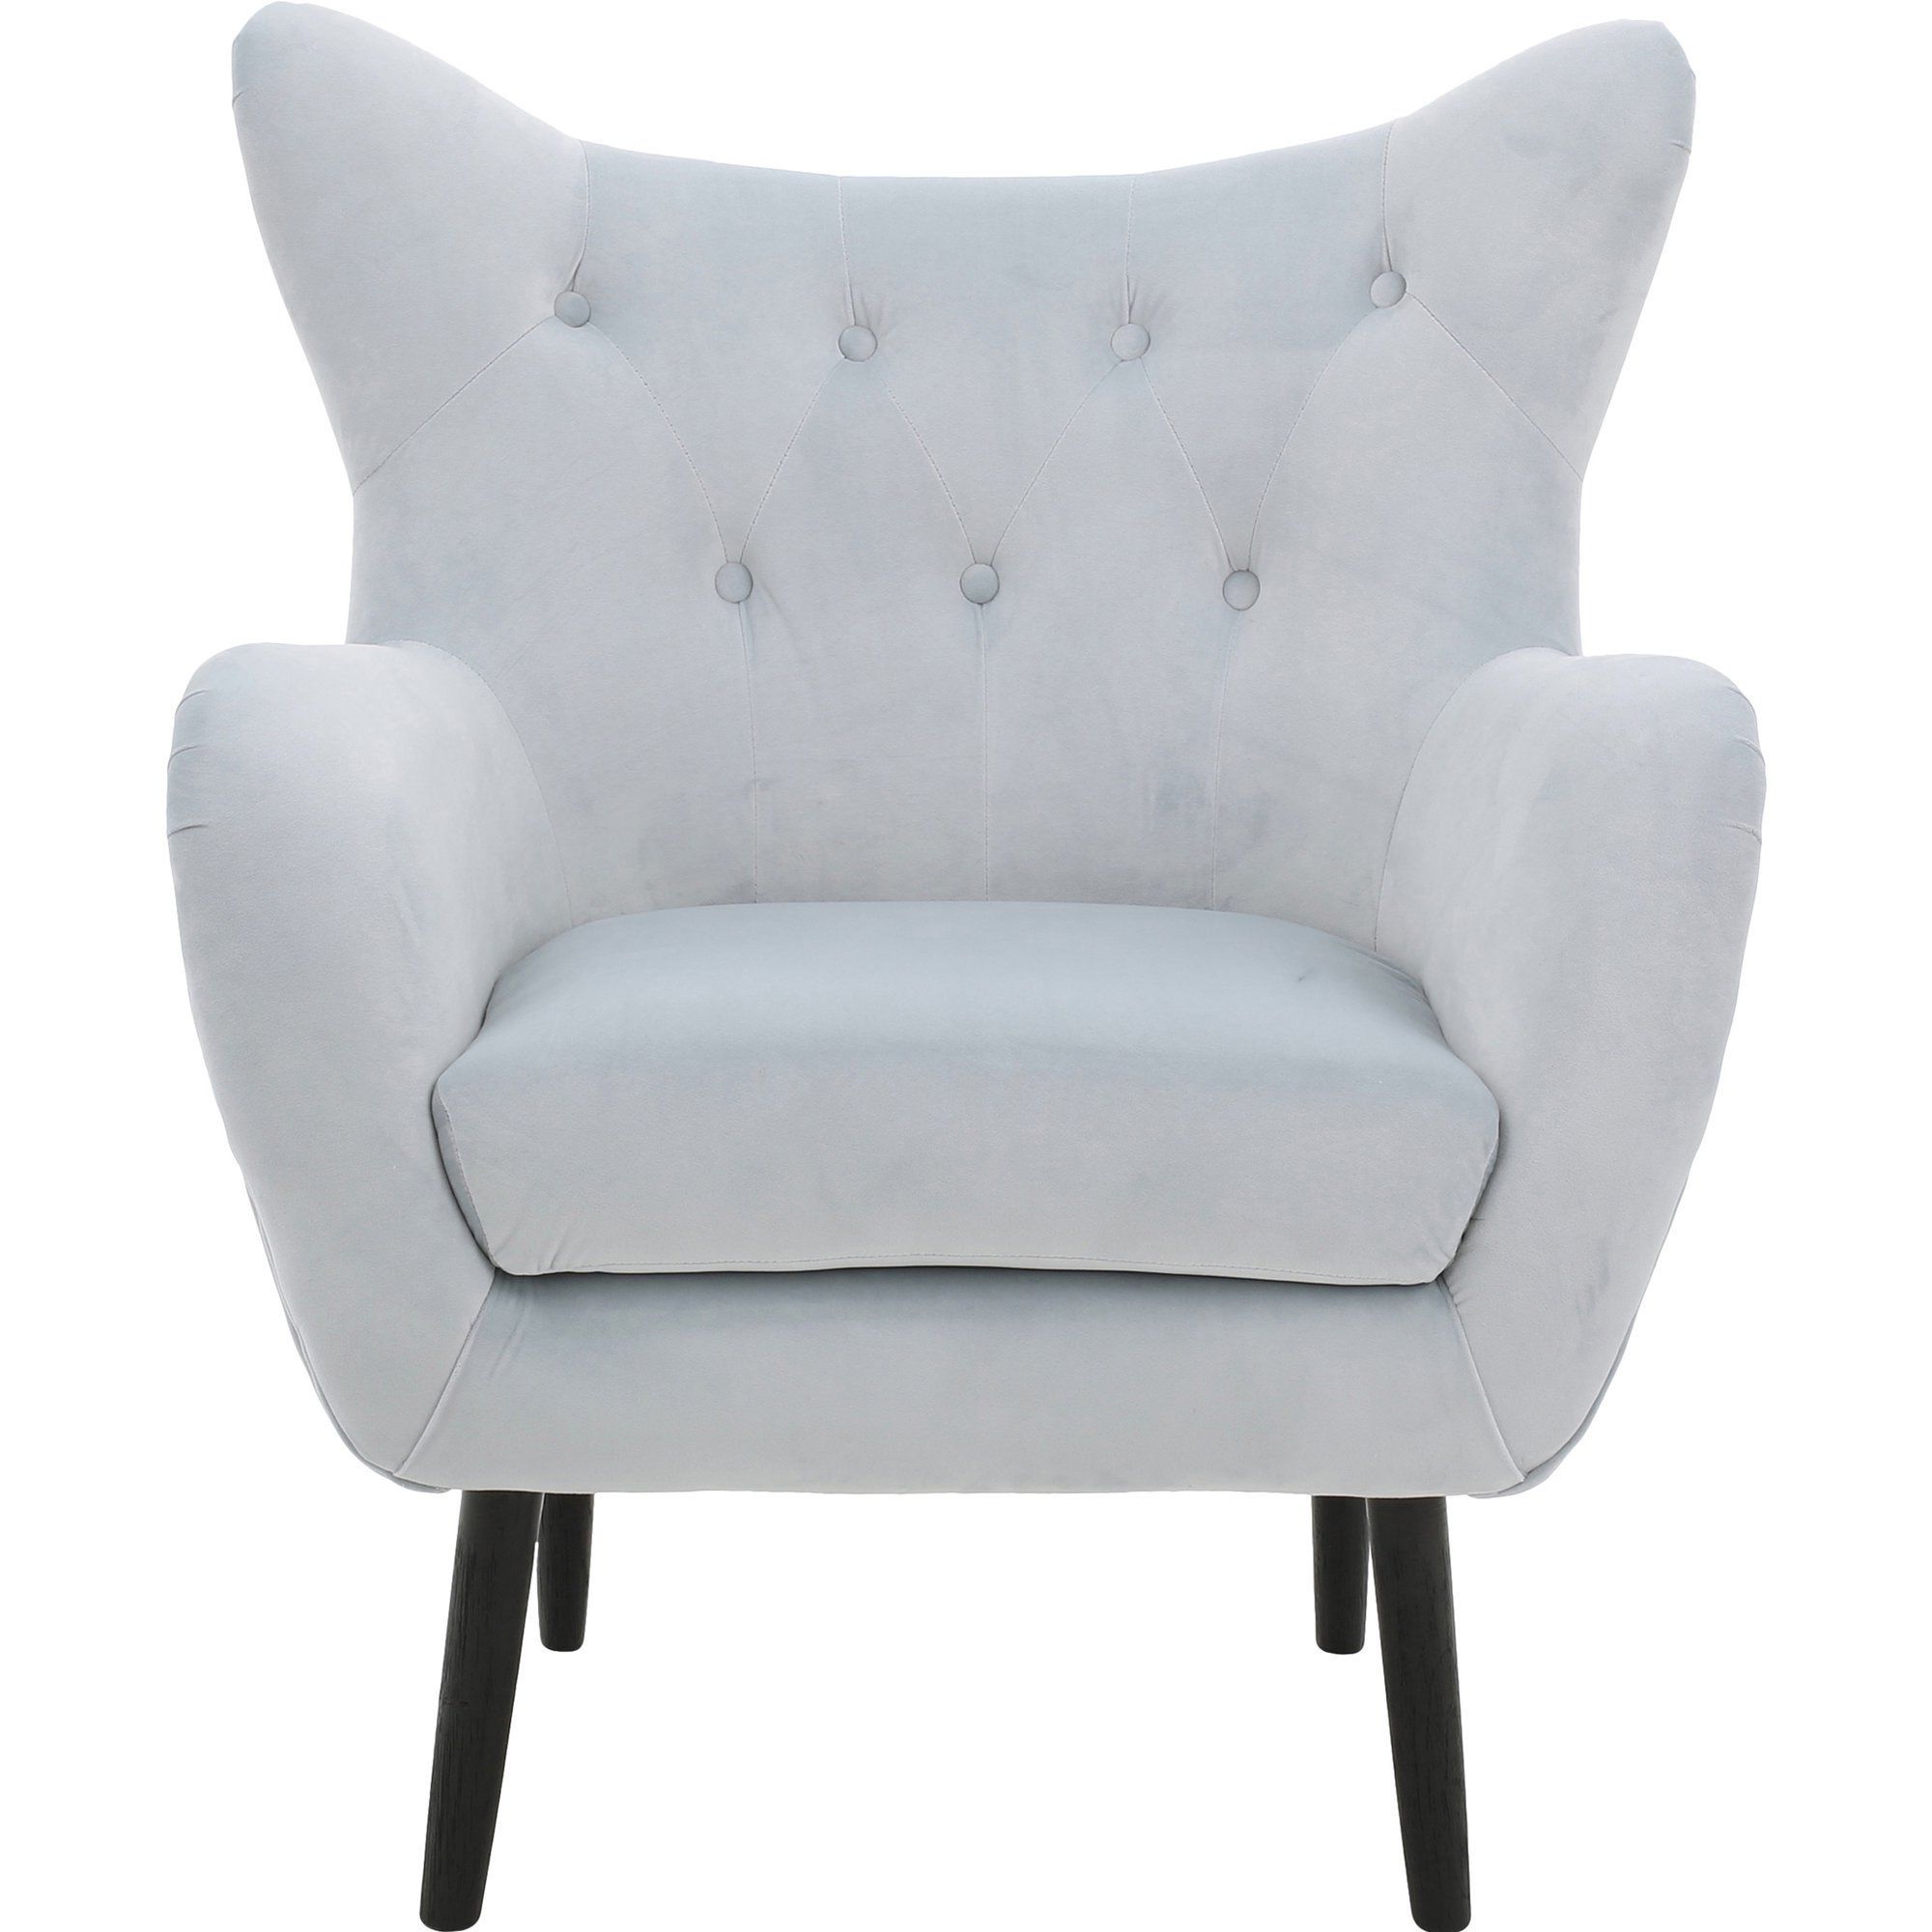 Wingback Chair, Accent Chairs, Mid Intended For Bouck Wingback Chairs (View 18 of 20)